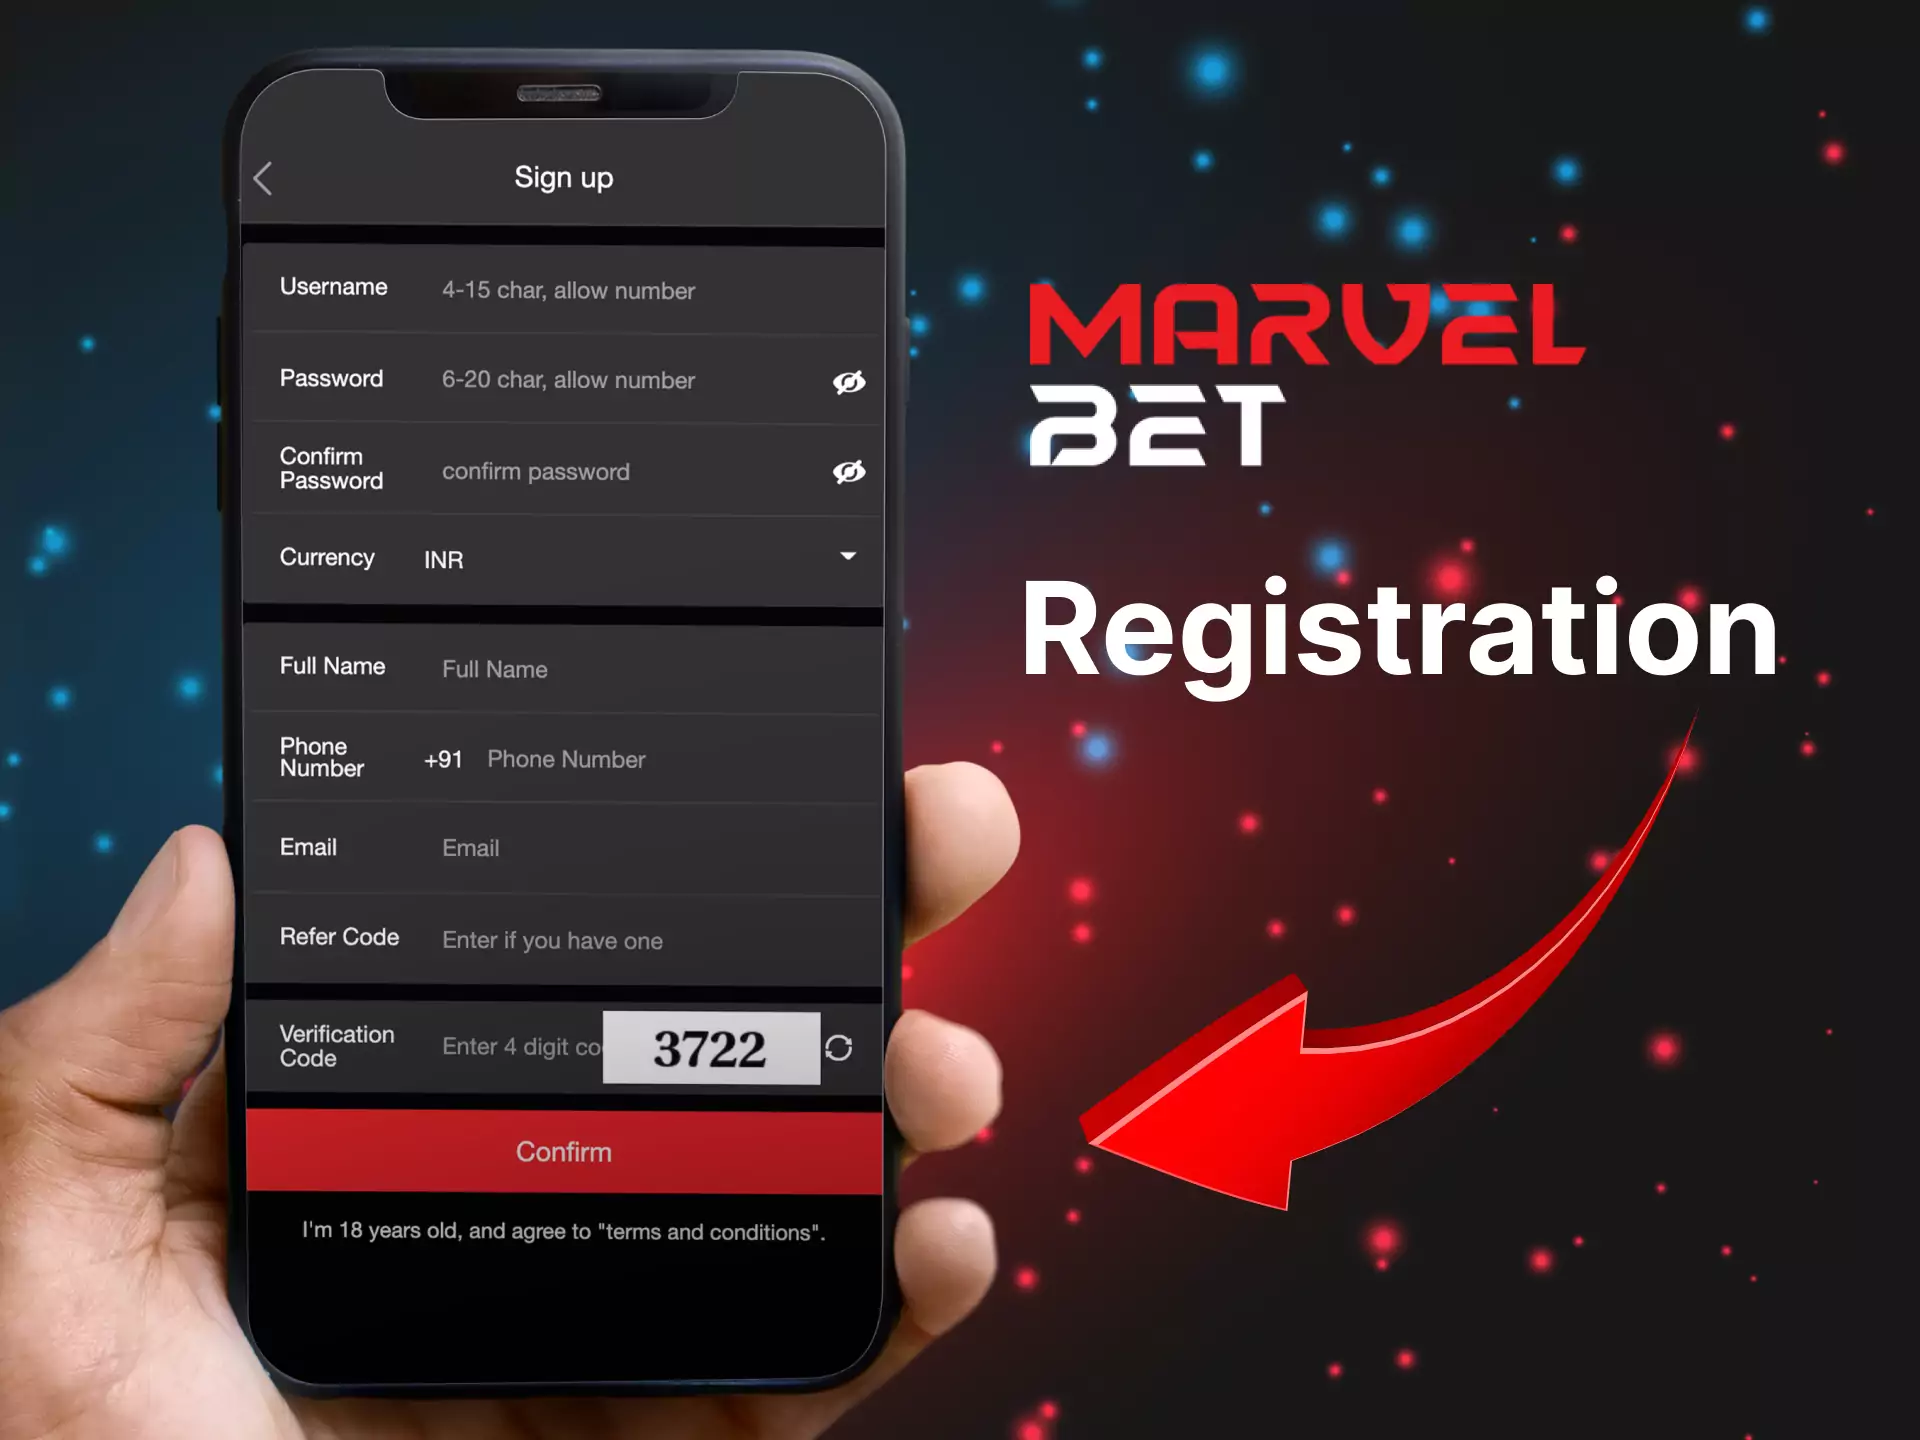 If you don't have an account yet, create a new one to be able to place bets on Marvelbet.